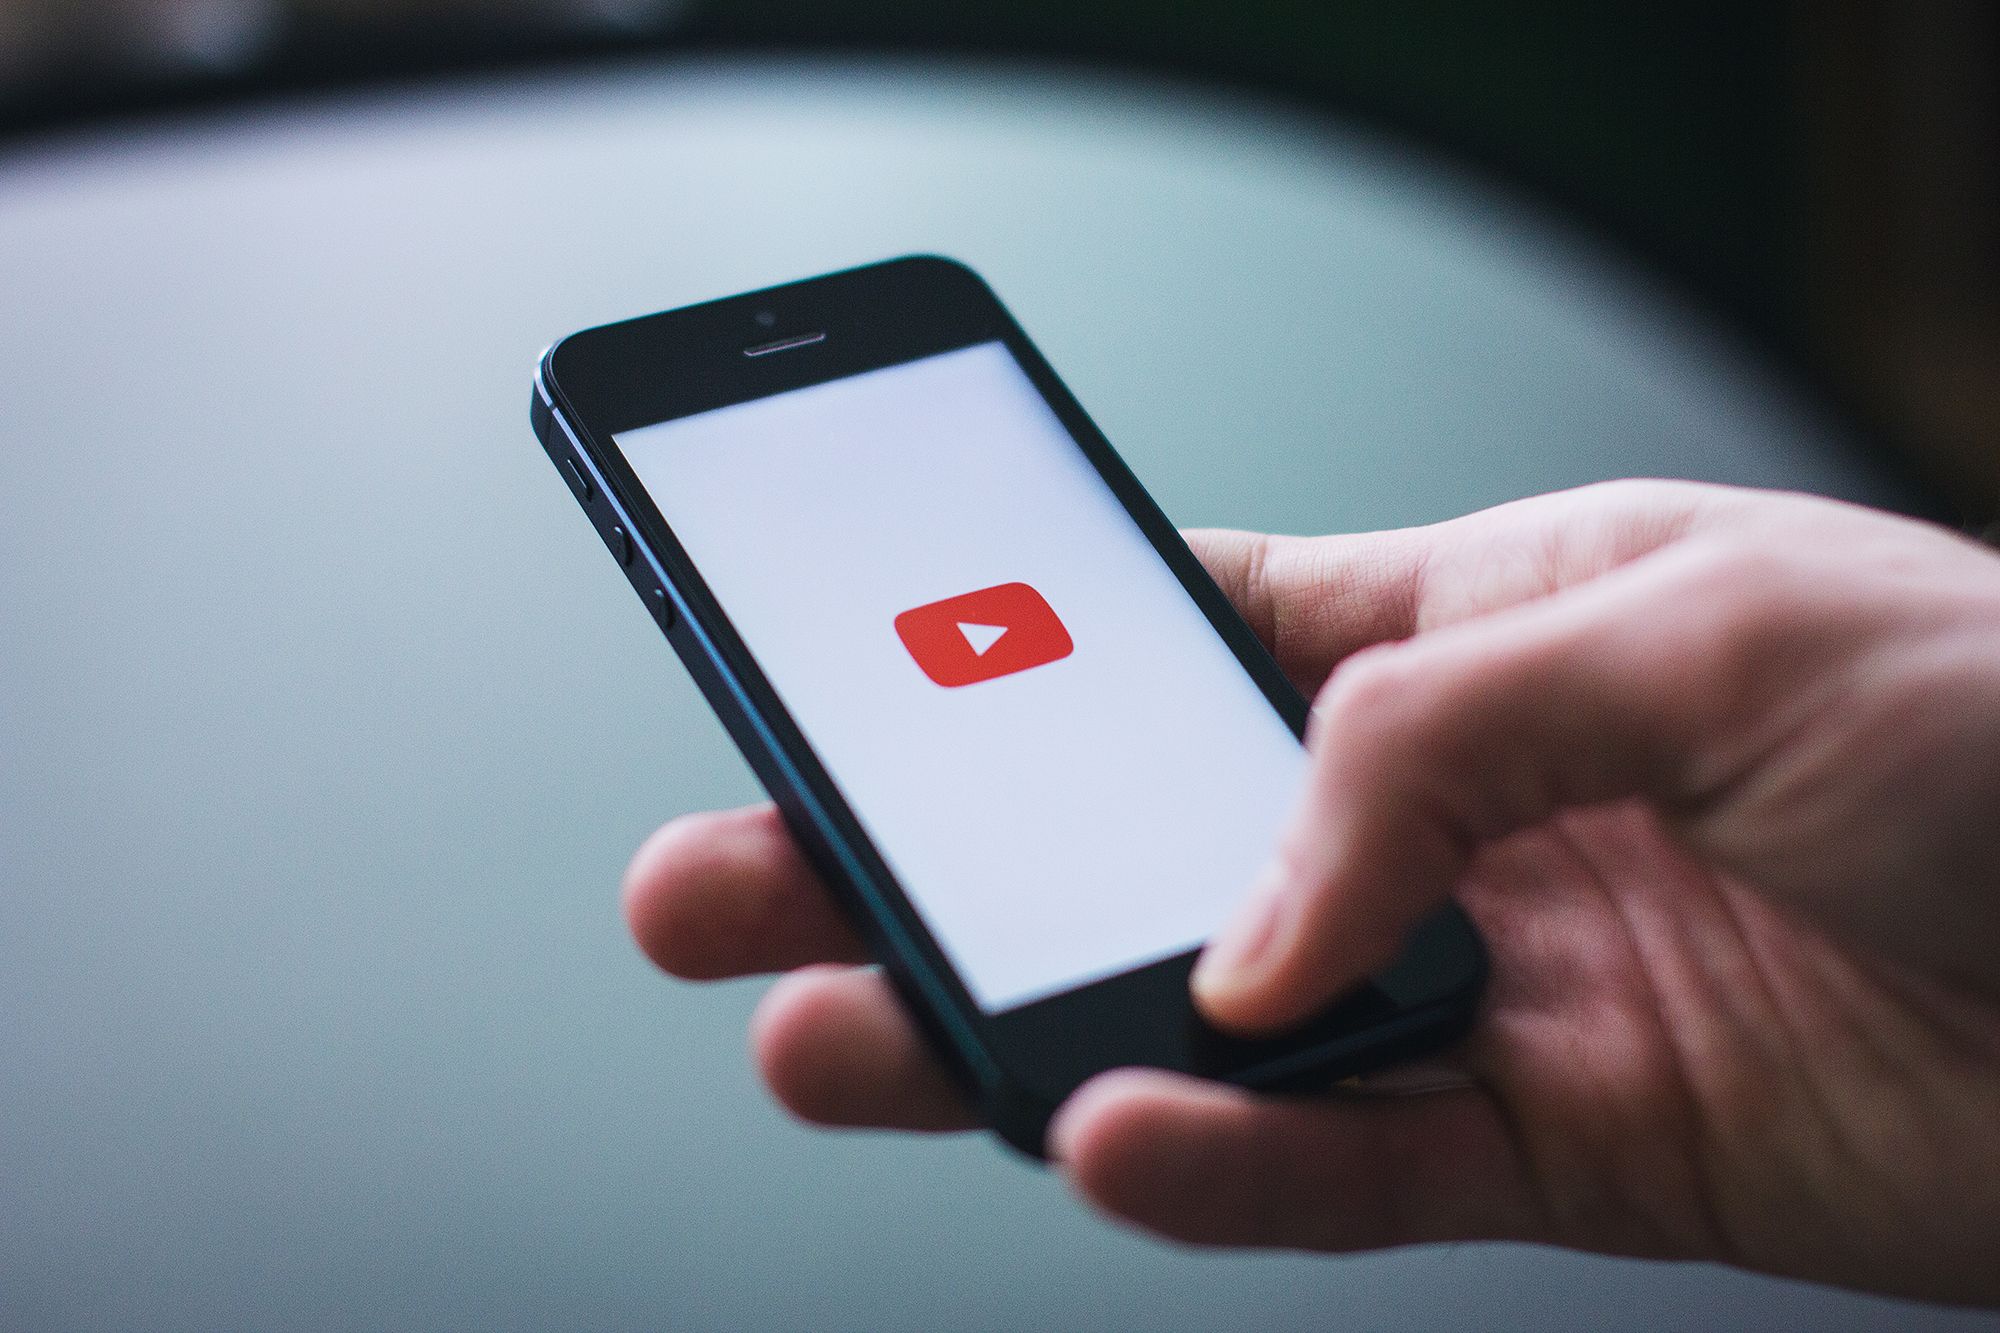 Why You Should Add Video to Your Website: It’s Great for SEO!